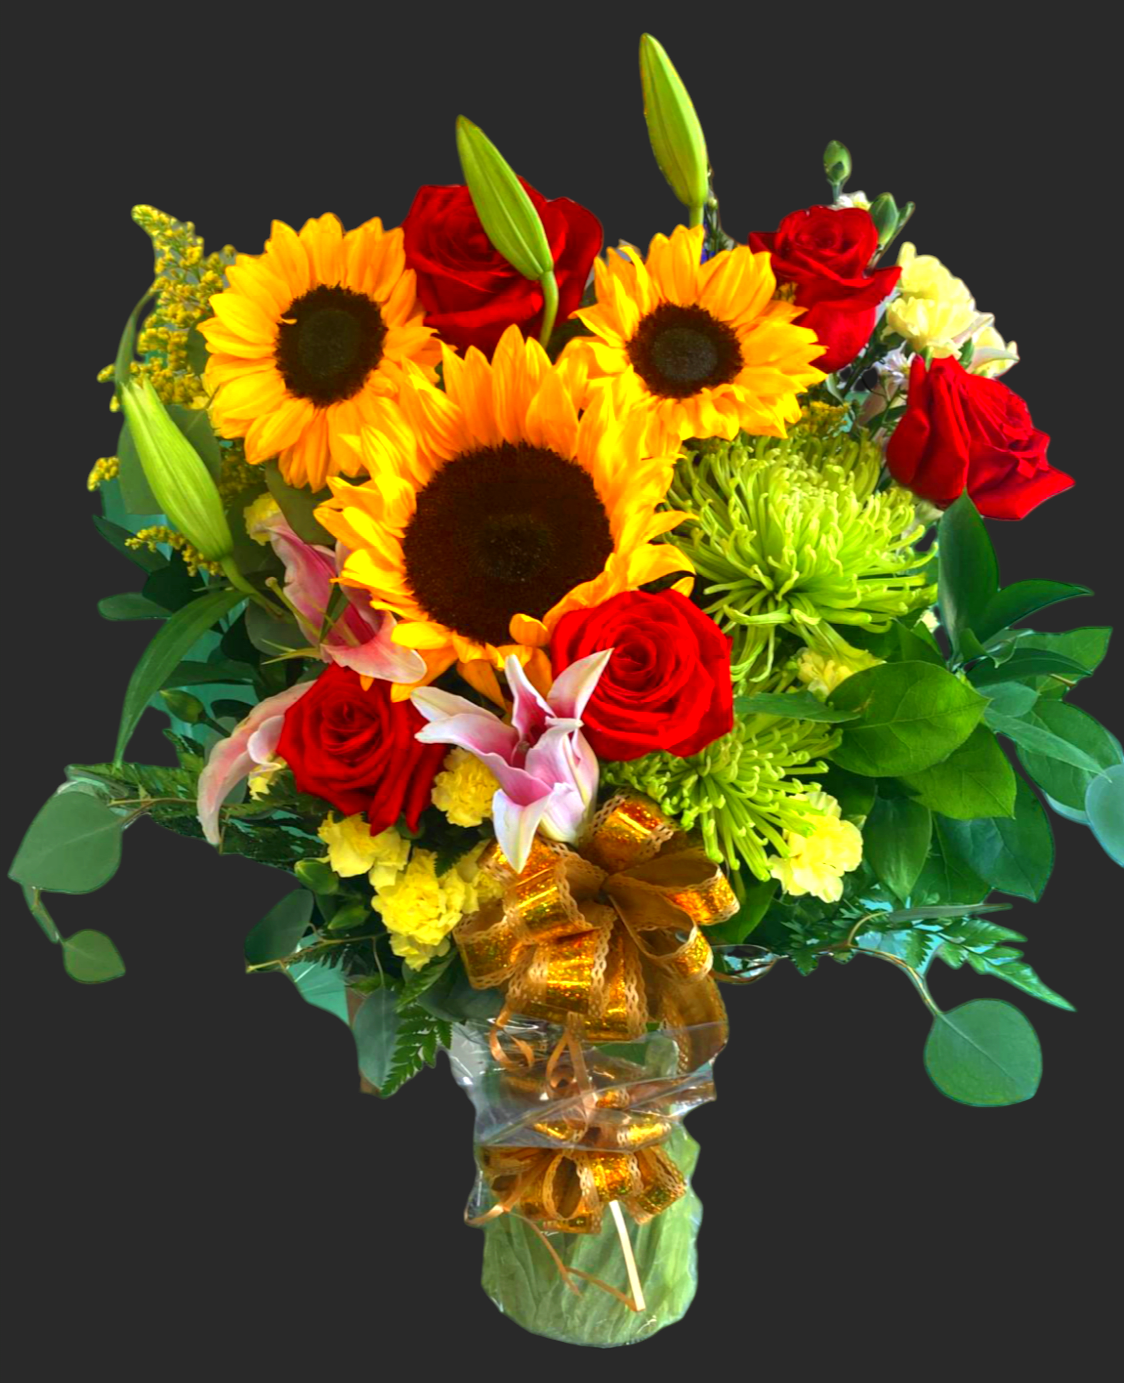 Large spring floral vase centerpiece - nice and large floral centerpiece with spring mixed flowers. A mix of sunflowers, green spider mums, yellow mini carnations, red roses, yellow solidago, pink lillies and greenery in a nice glass vase.